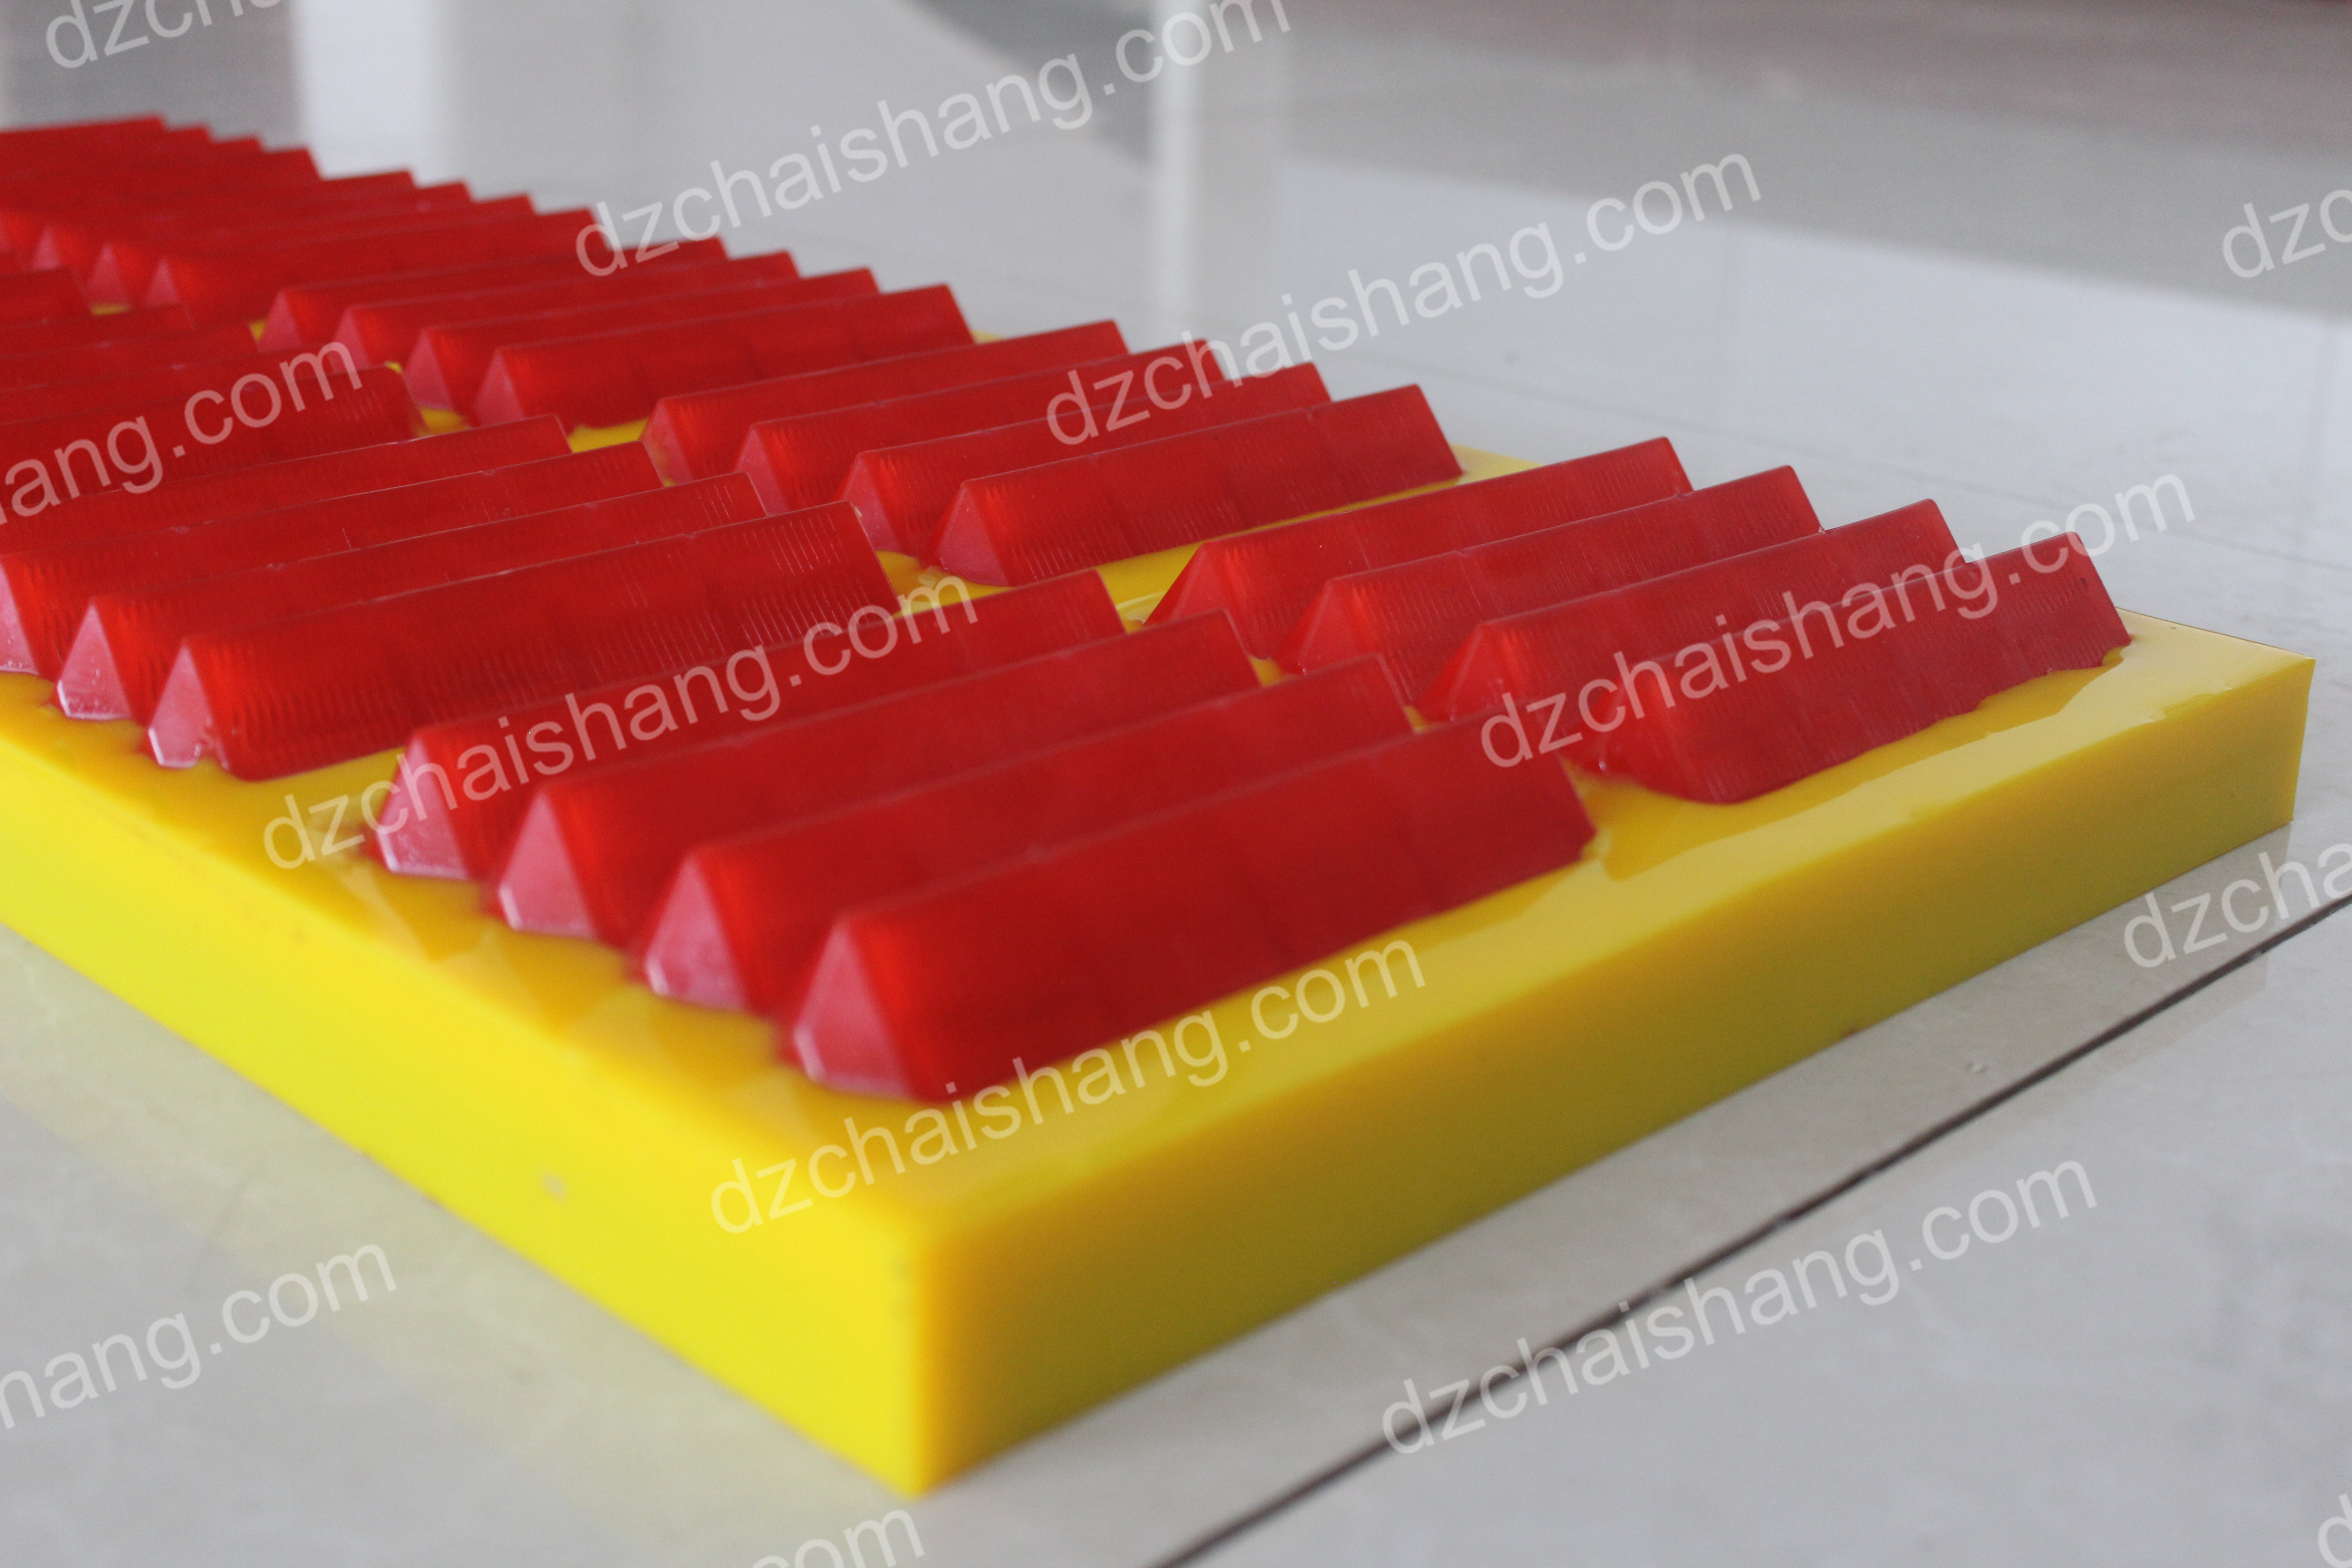 Six major process steps of “Polyurethane Screen”-CHAISHANG | Polyurethane Screen,Rubber Screen PanelsHigh frequency screen mesh,Belt Cleaner,Flotation Cell